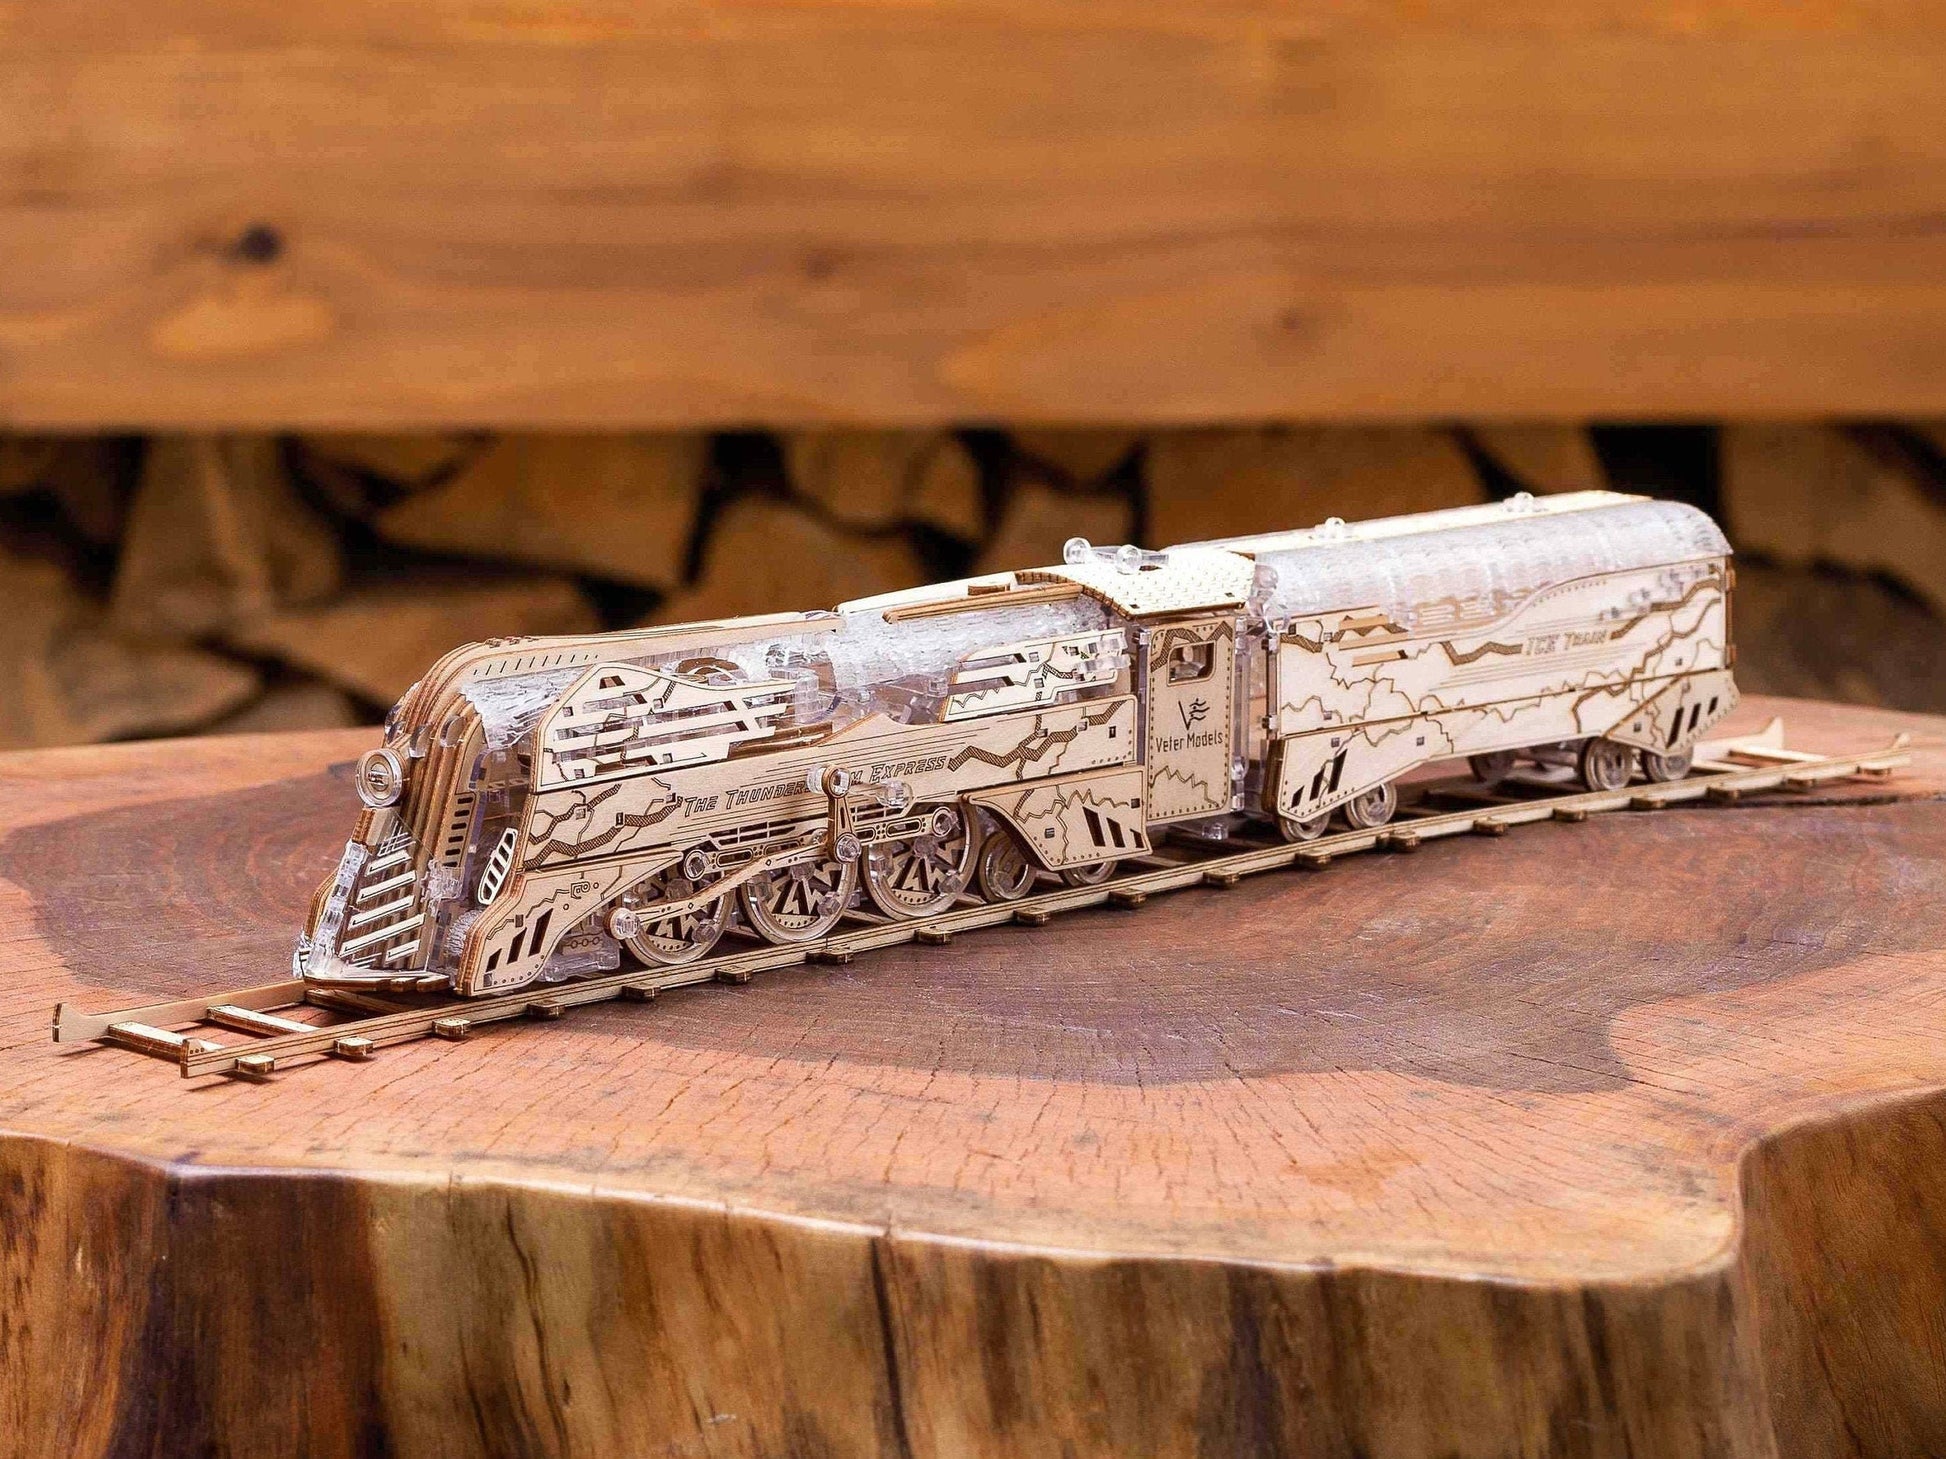 The Thunderstorm Express. Train with tender. Mechanical model. wooden train, Veter Models, gift idea, wooden kit, hybrid, decor, 3d puzzle